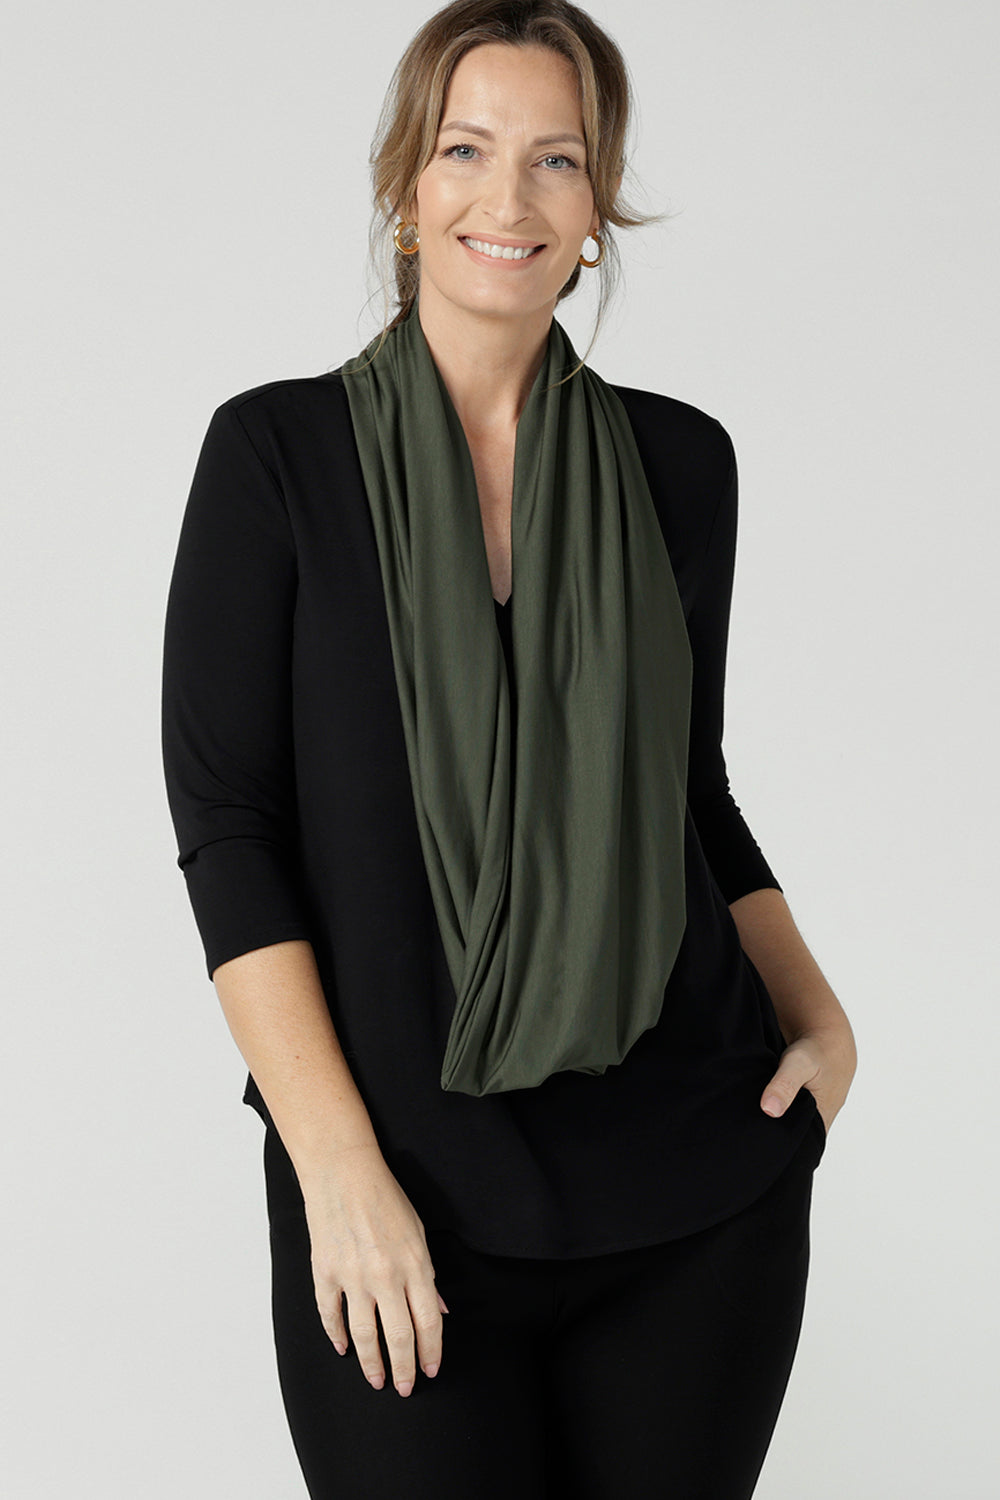 complete your capsule wardrobe for work, travel and play with this Infinity Scarf in luxurious and soft combat bamboo jersey.